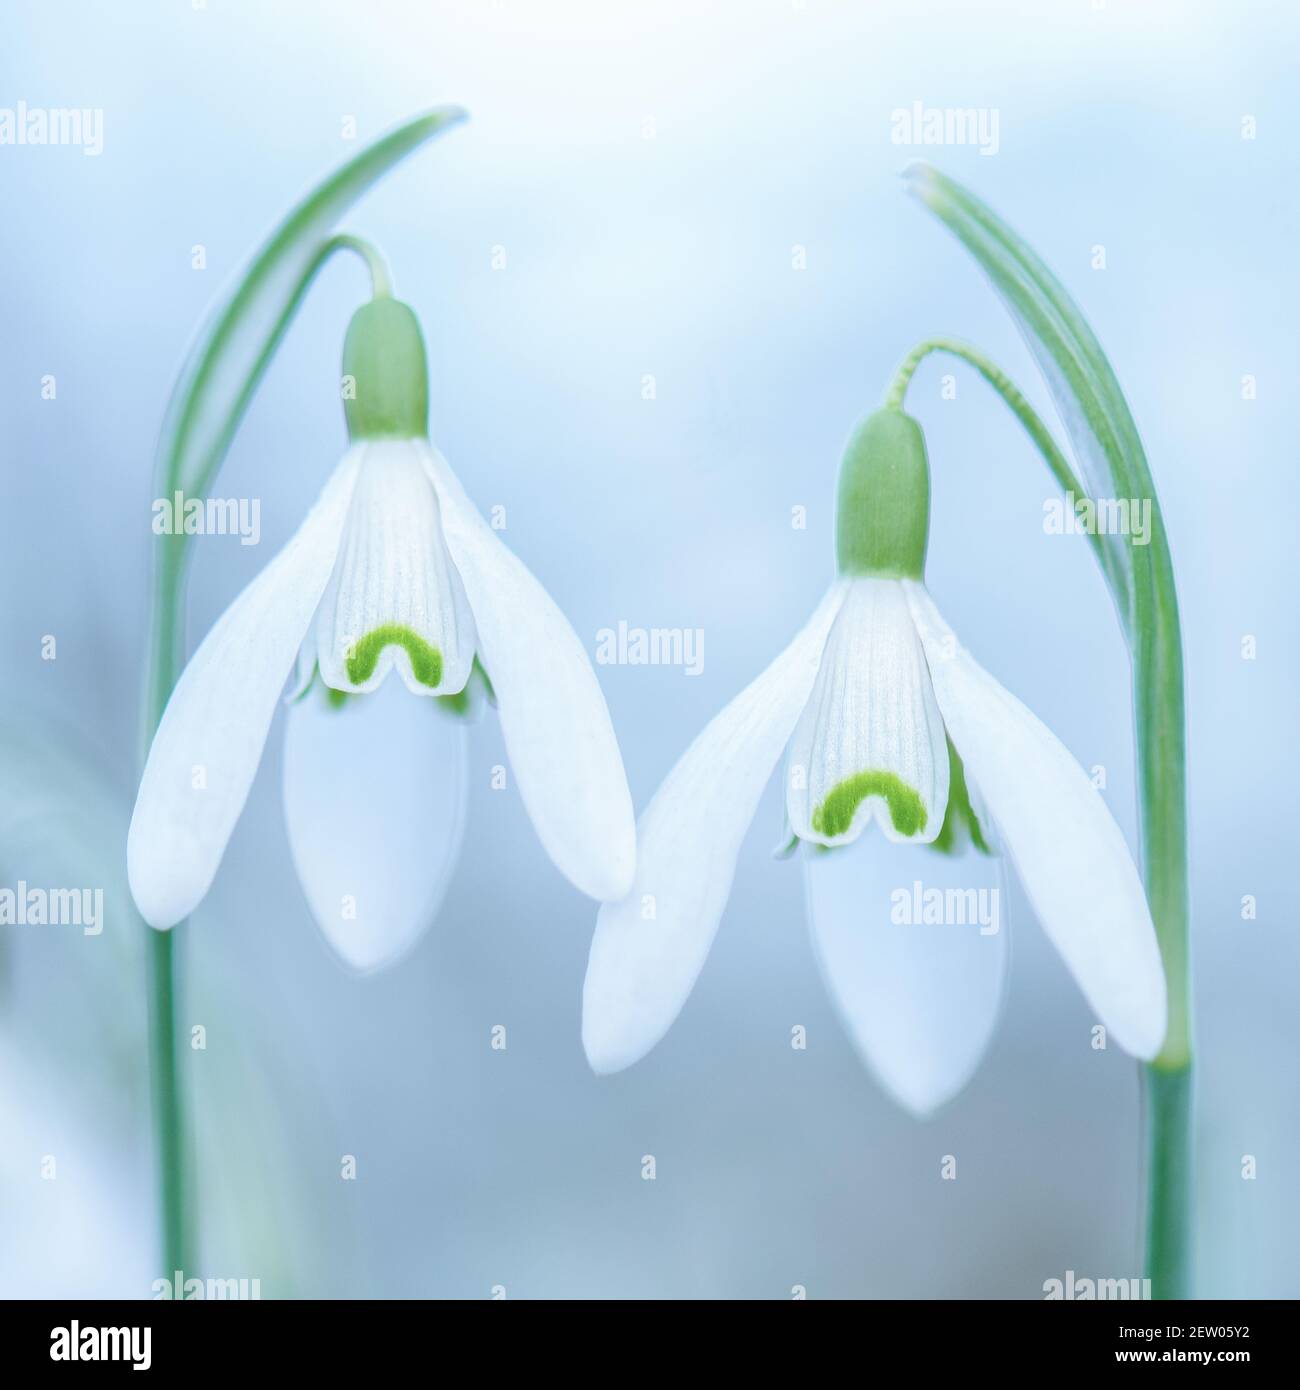 A beautiful peaceful, arty close up of a  pair of snowdrops, galanthus nivalis, side by side, symmetrical on a cloudy white background. Togetherness. Stock Photo